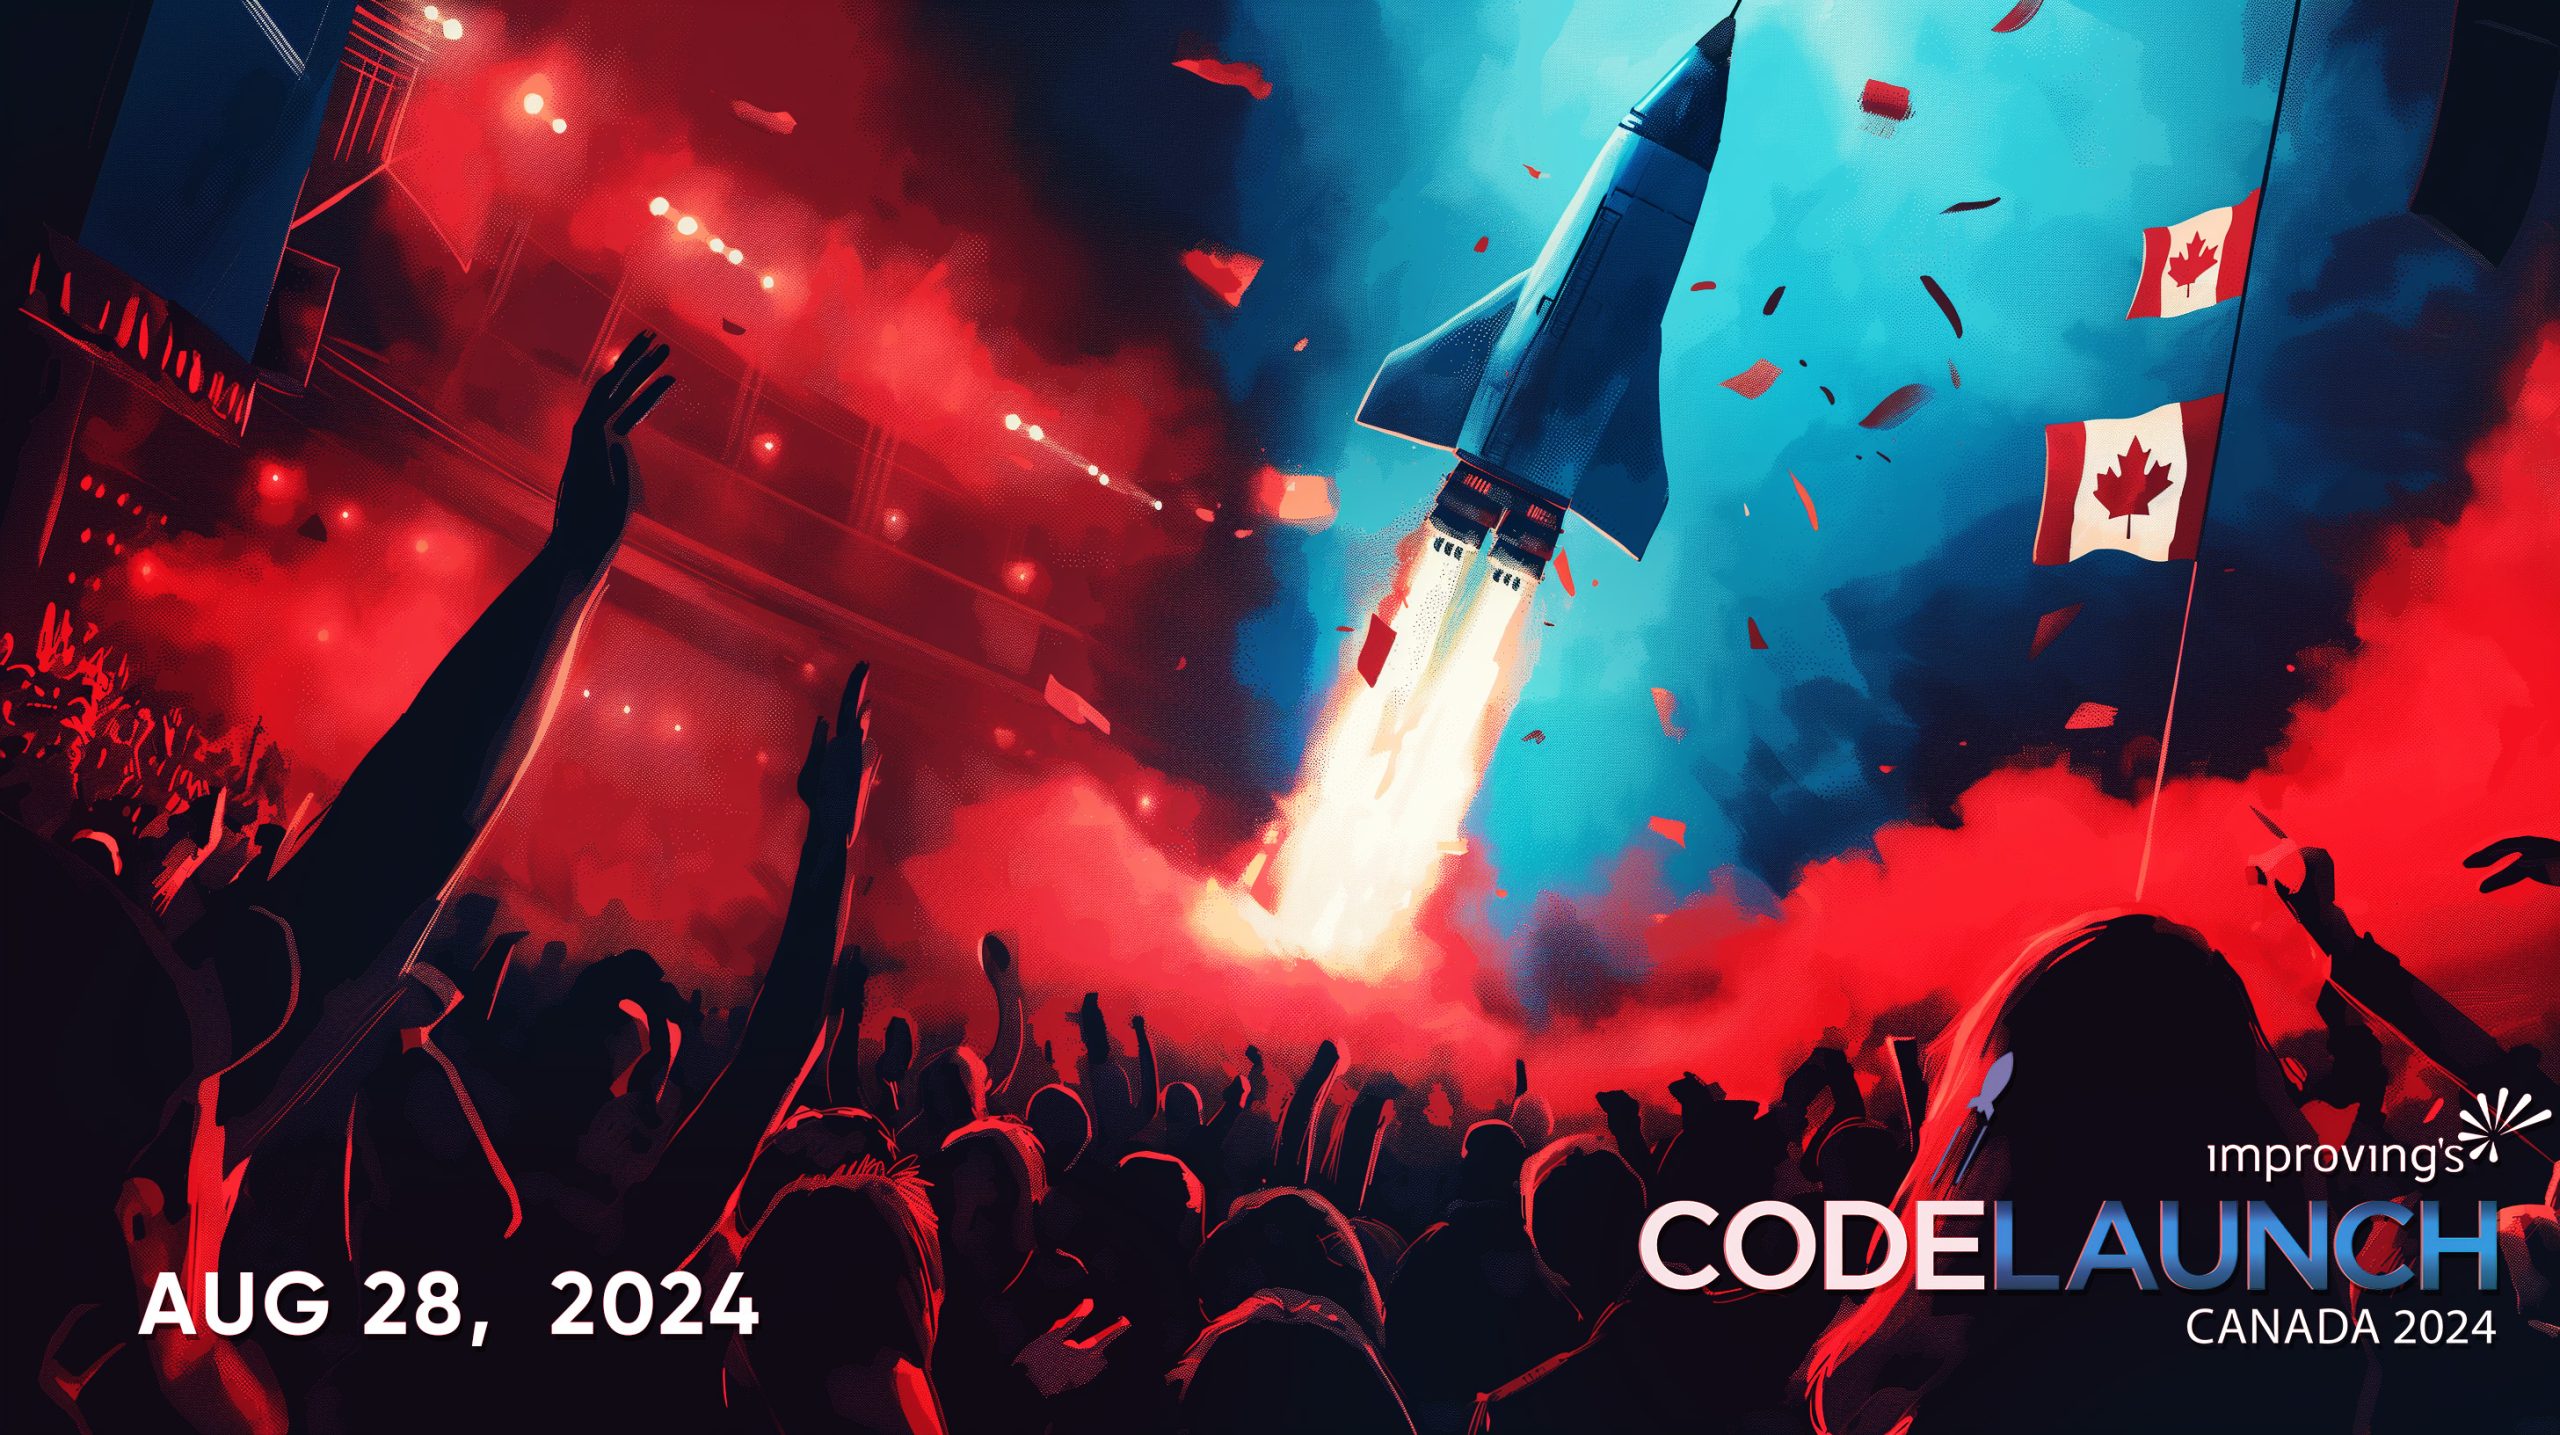 CodeLaunch is Making Its Canadian Debut! Rev Up Your Startup Journey and Apply Now